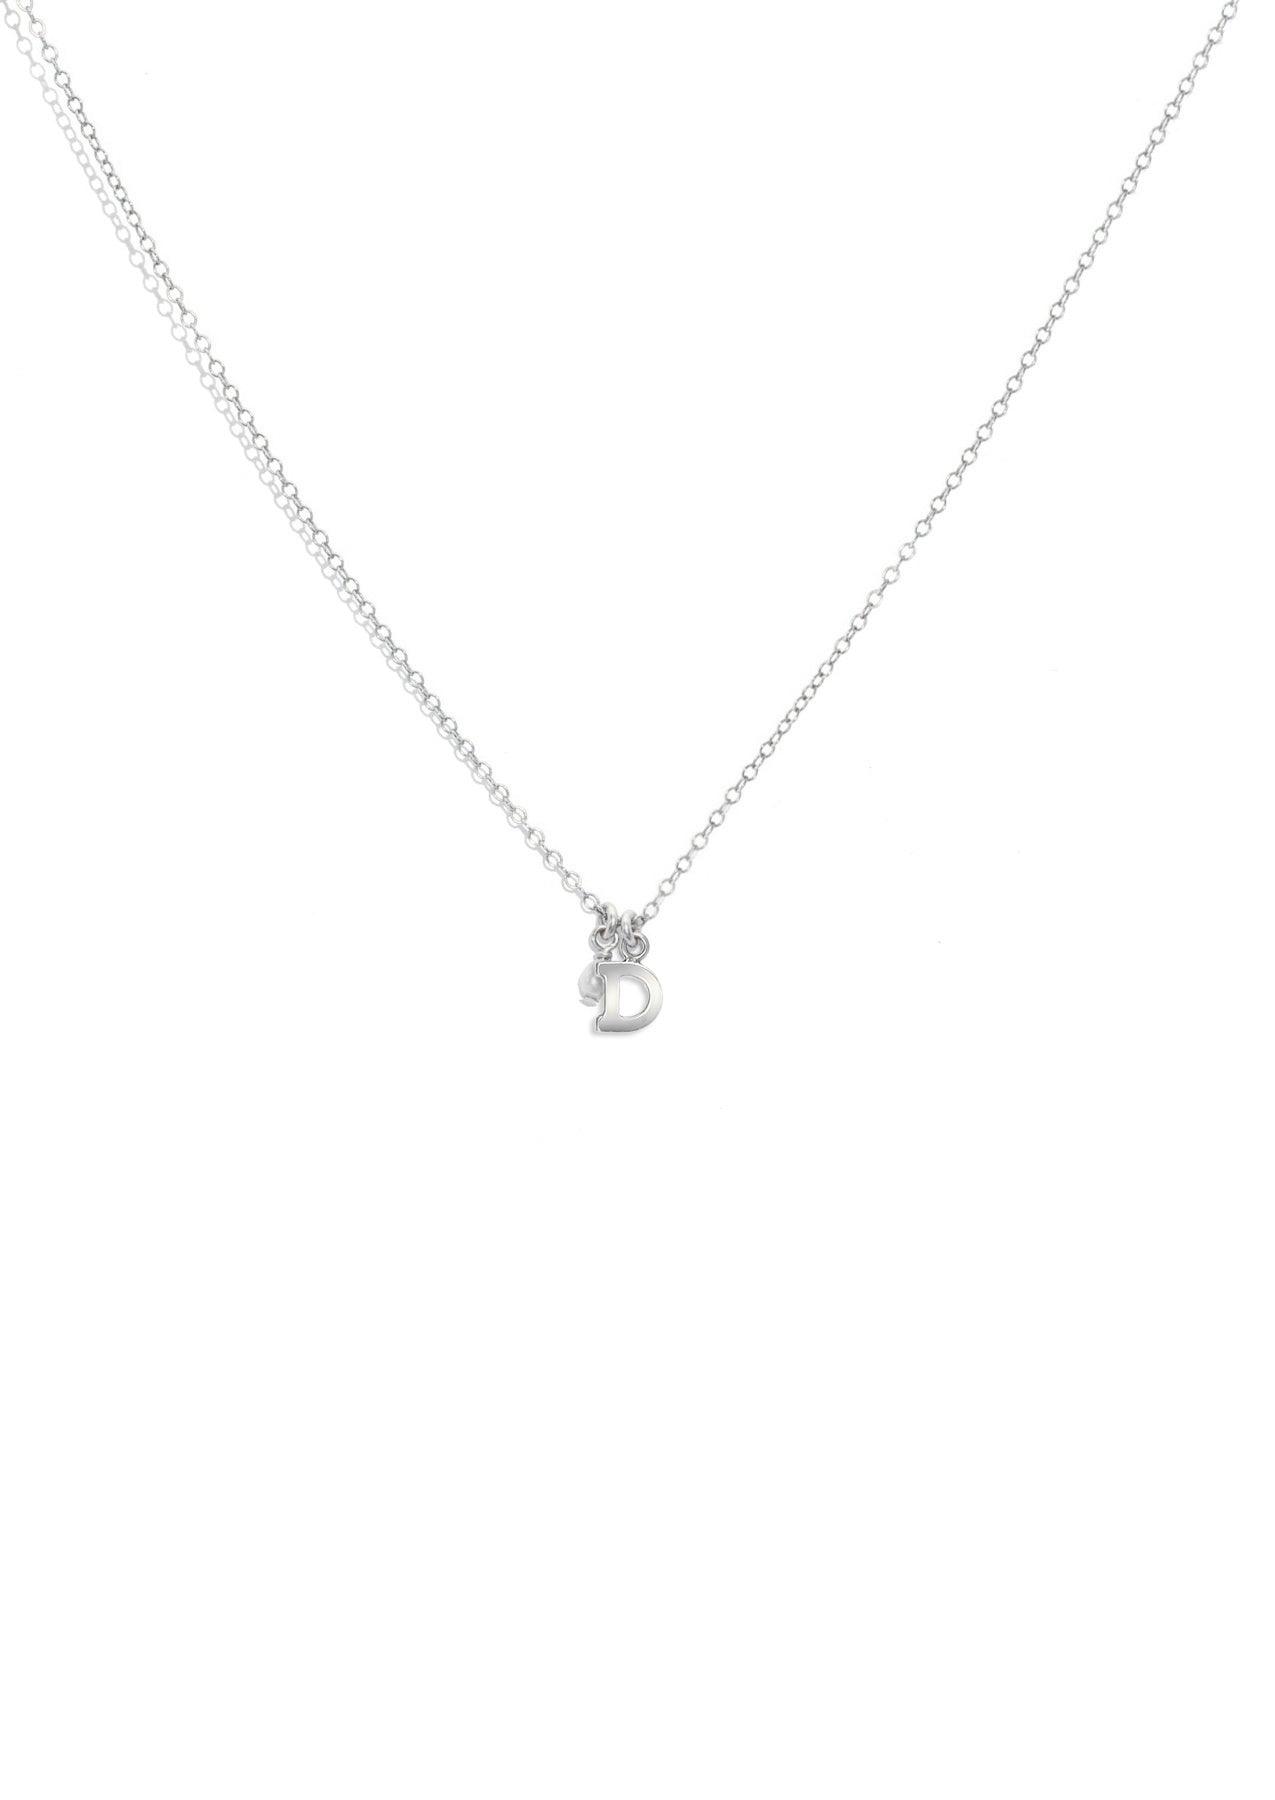 The Initial Silver Charm Necklace - Molten Store